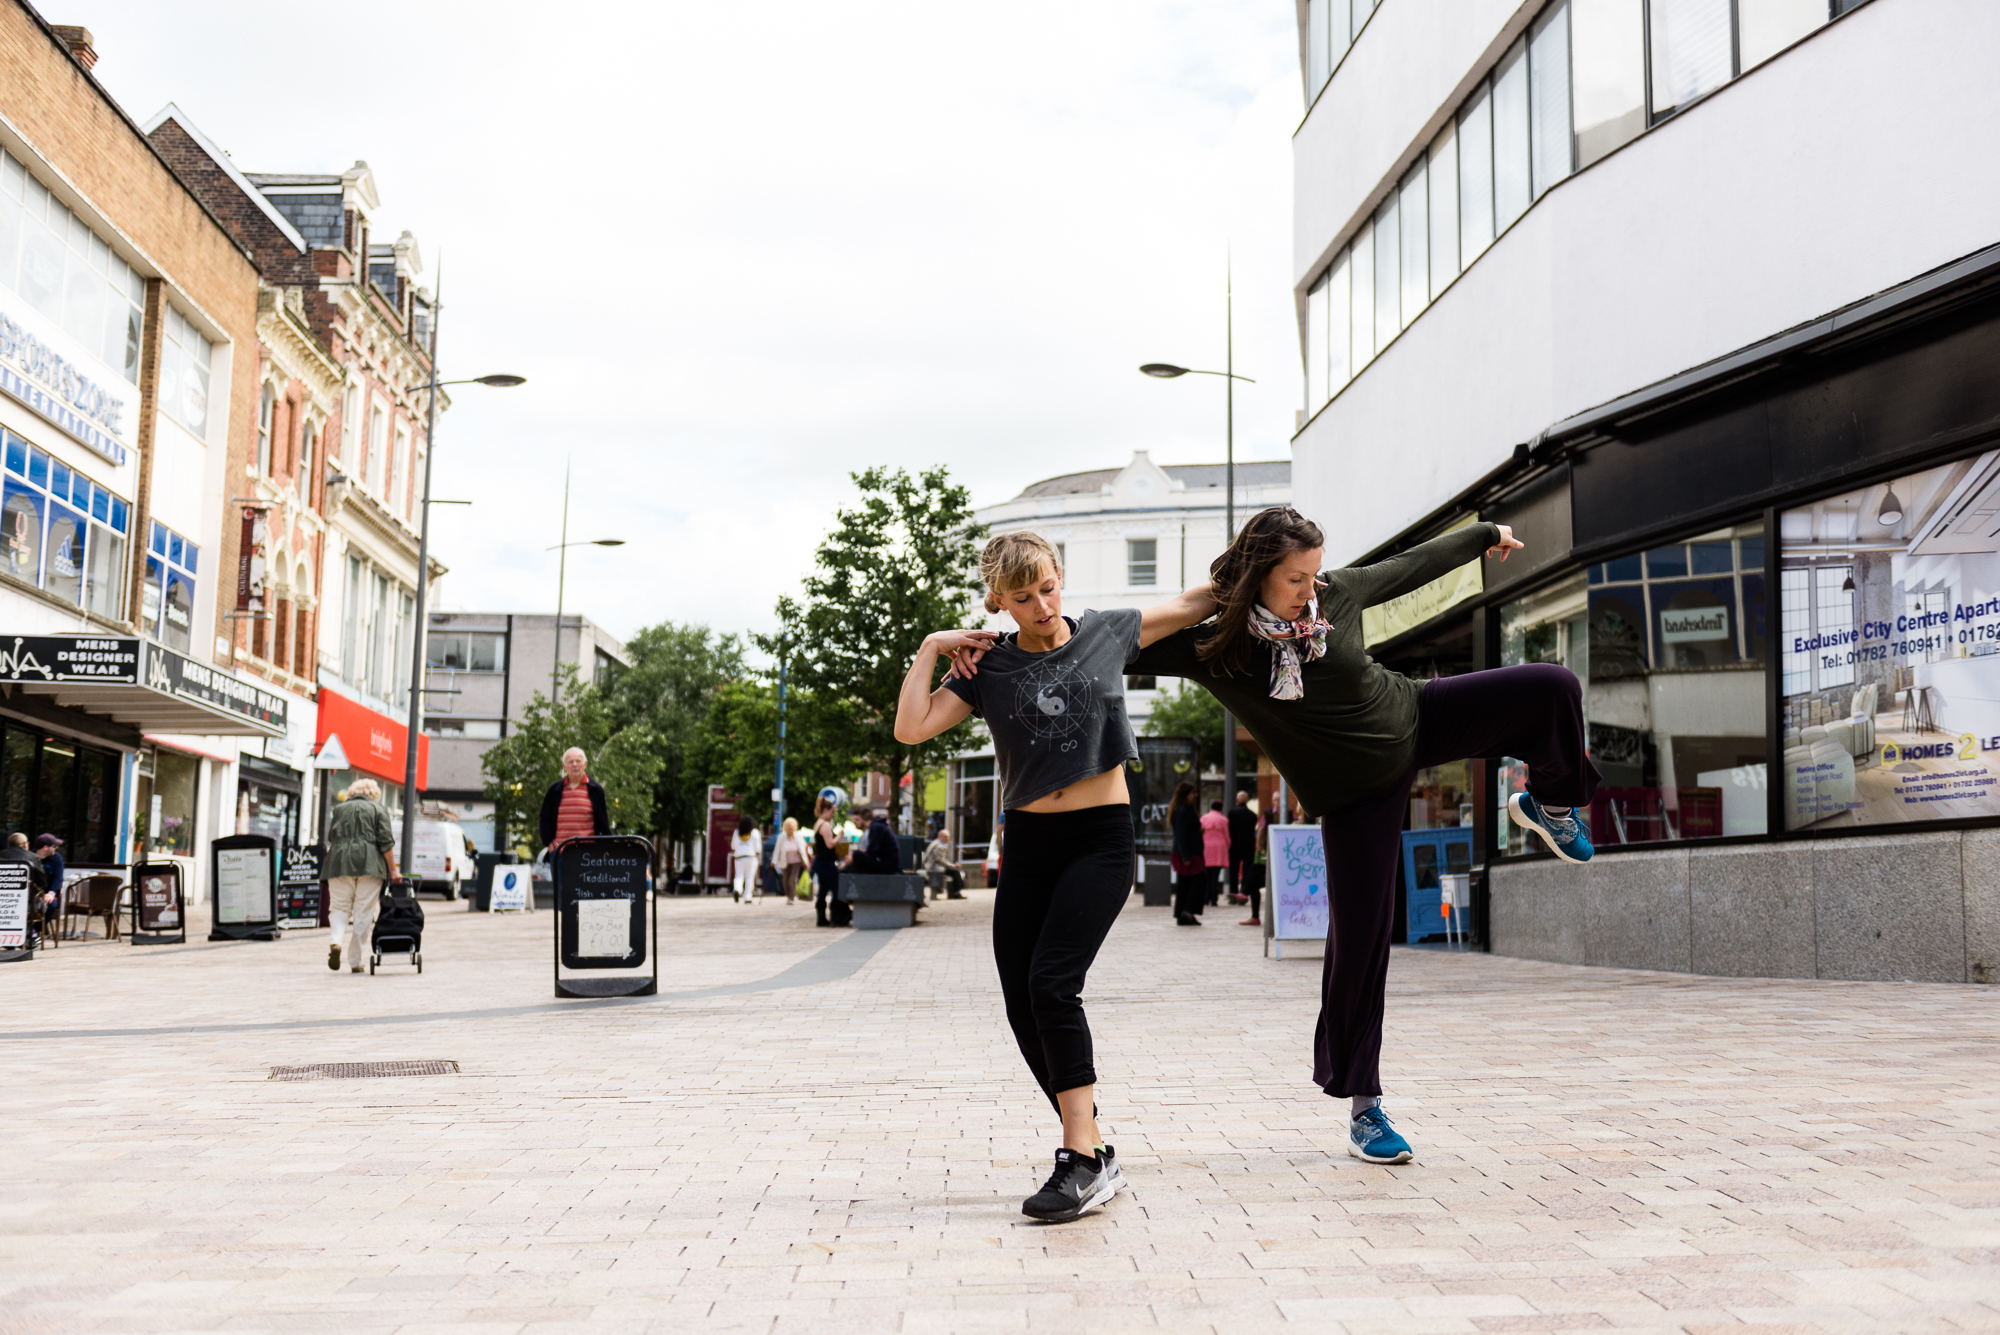 Restoke - Big Dance Rehearsal - Dance Fridays - Dancing in the Street - The Regent Theatre,  Picadilly, Hanley - Documentary Photography by Jenny Harper-6.jpg